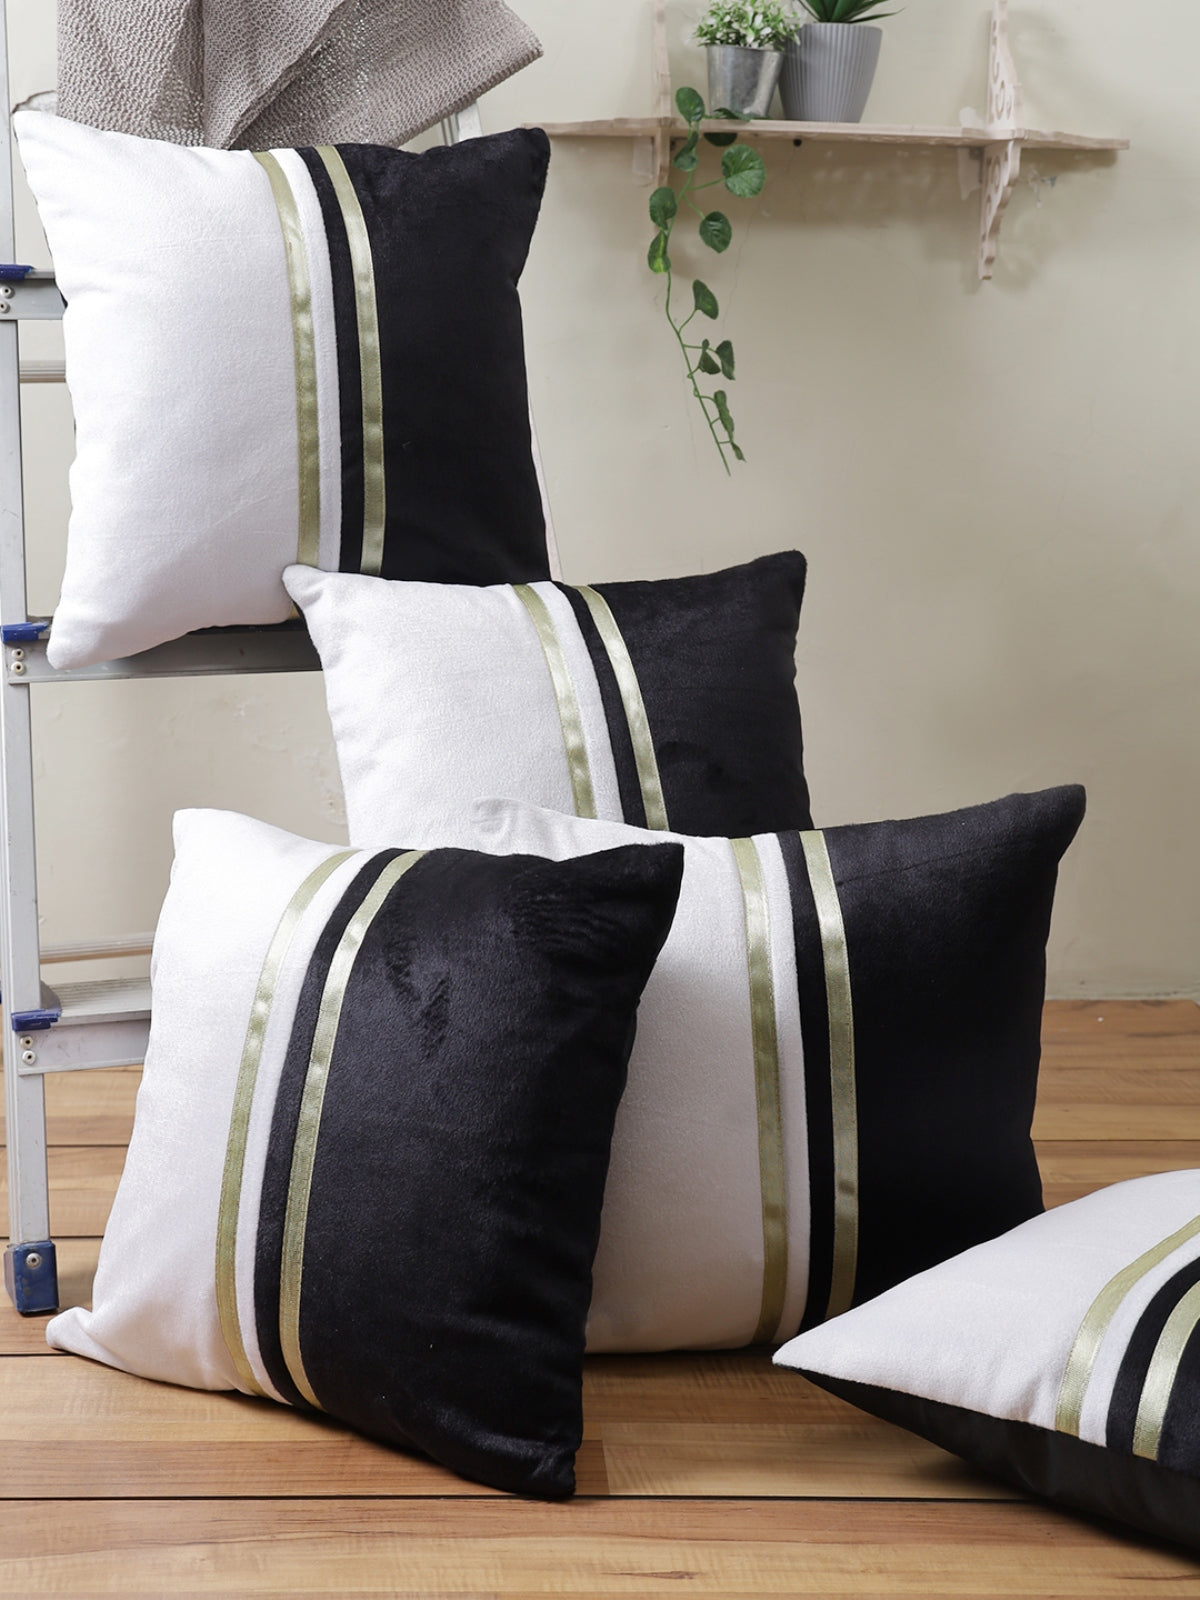 White & Black Set of 5 Polyester 16 Inch x 16 Inch Cushion Covers